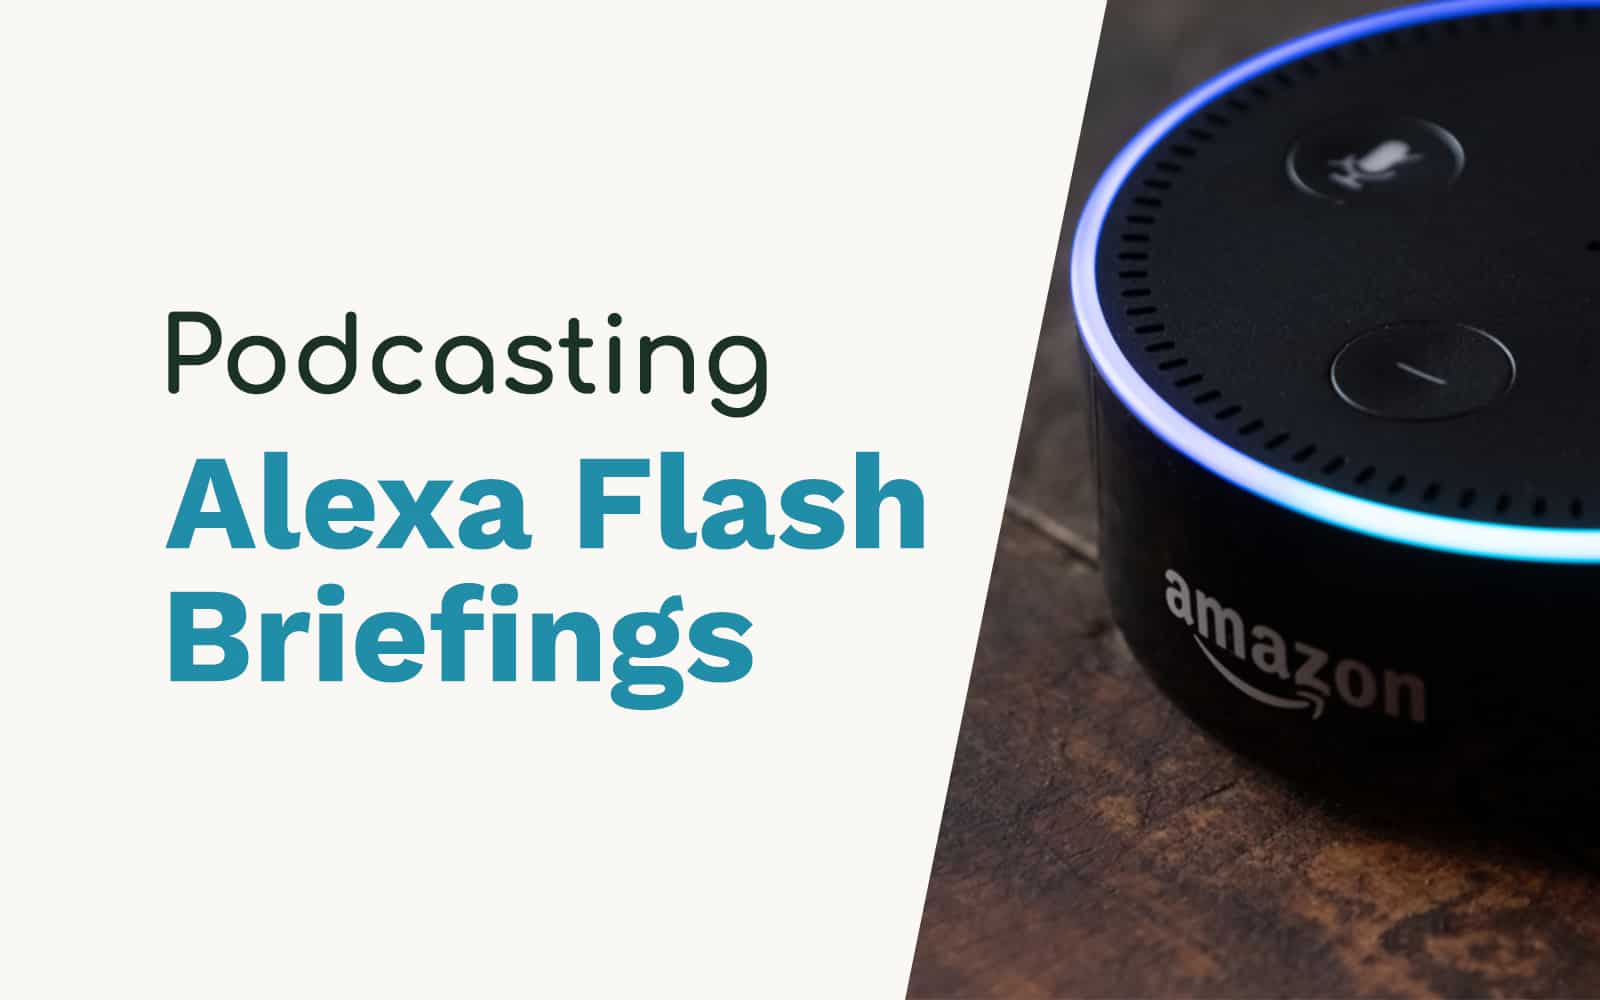 Alexa Flash Briefings – Podcasters Get Your Skills Out There! General alexa flash briefing Music Radio Creative